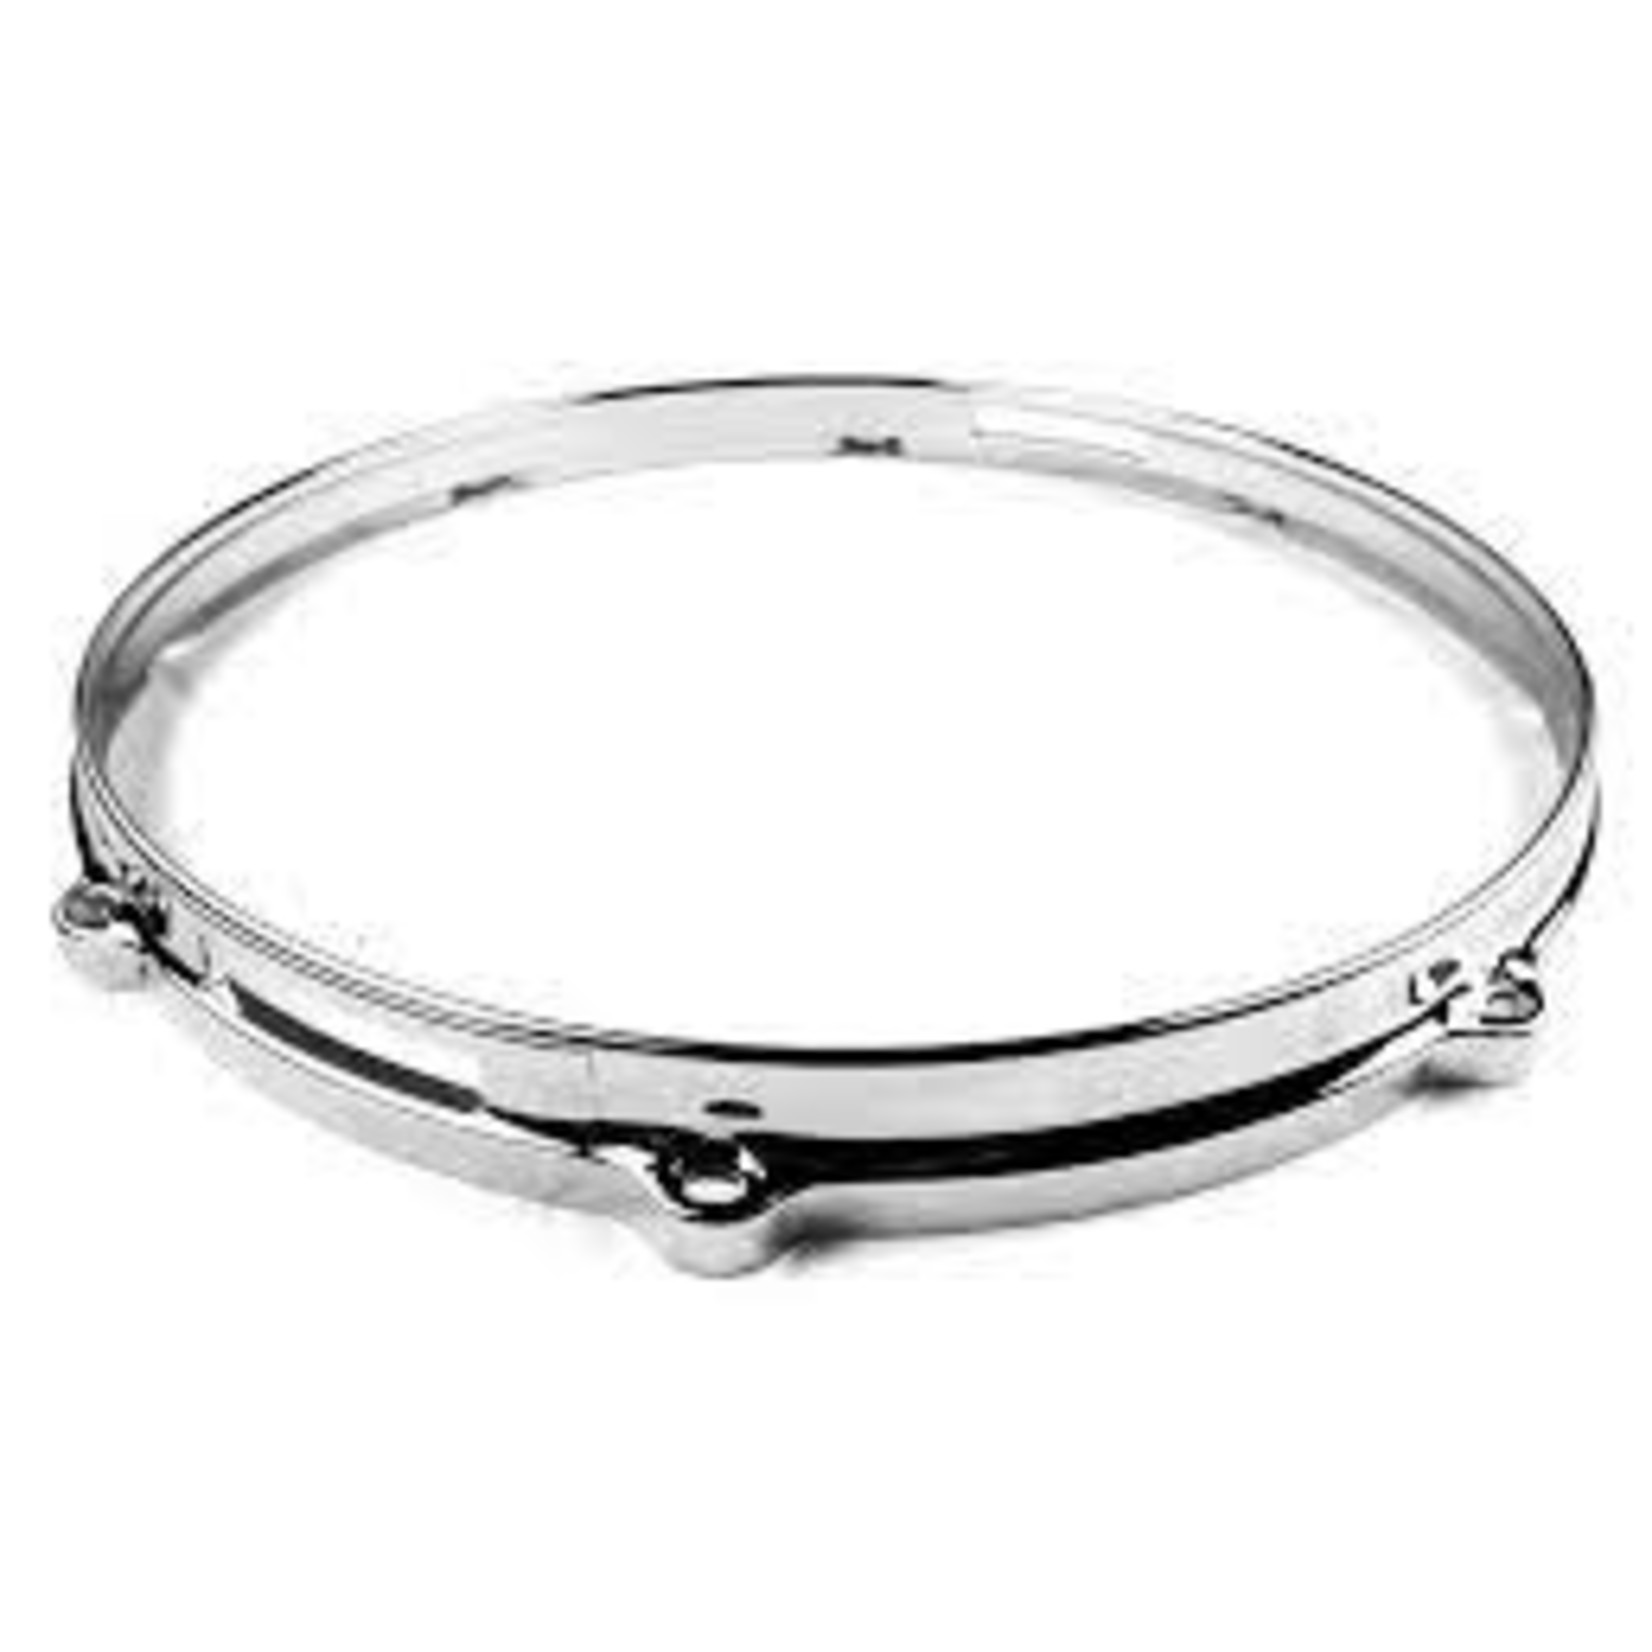 Ludwig Ludwig 14 10 HOLE DIE CAST SNARE SIDE HOOP, CHROME PLATED